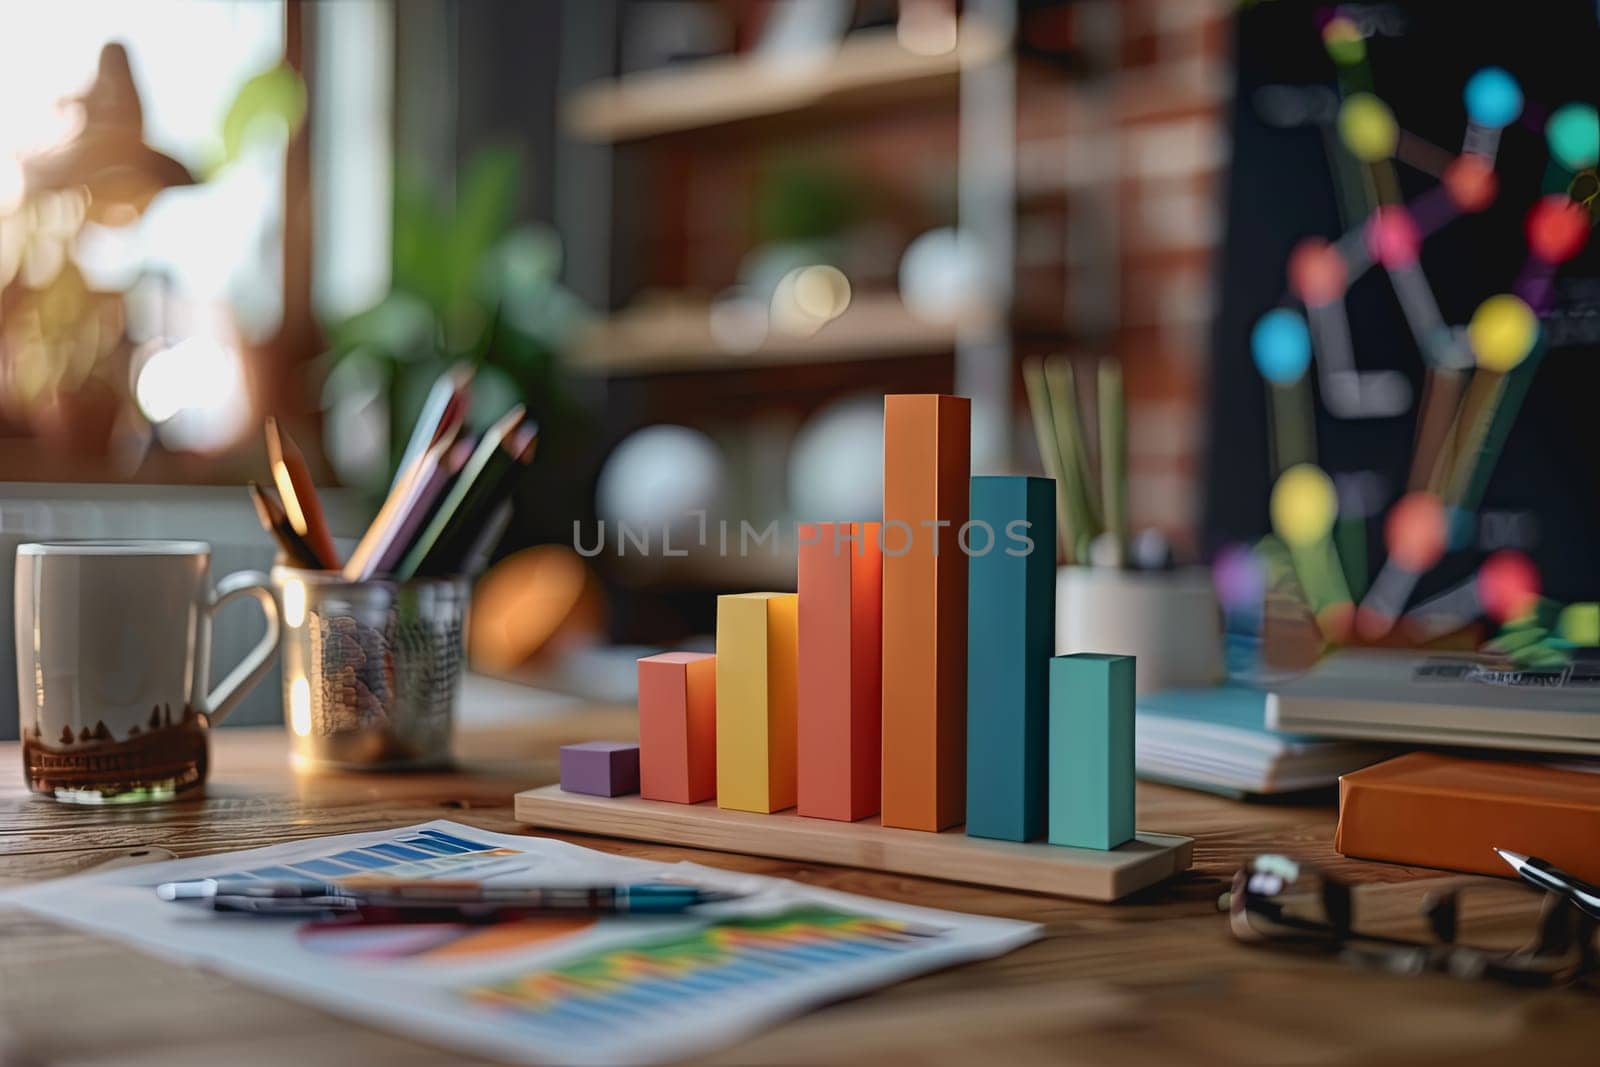 three dimensional mockup charts showing financial data and business growth. by Manastrong